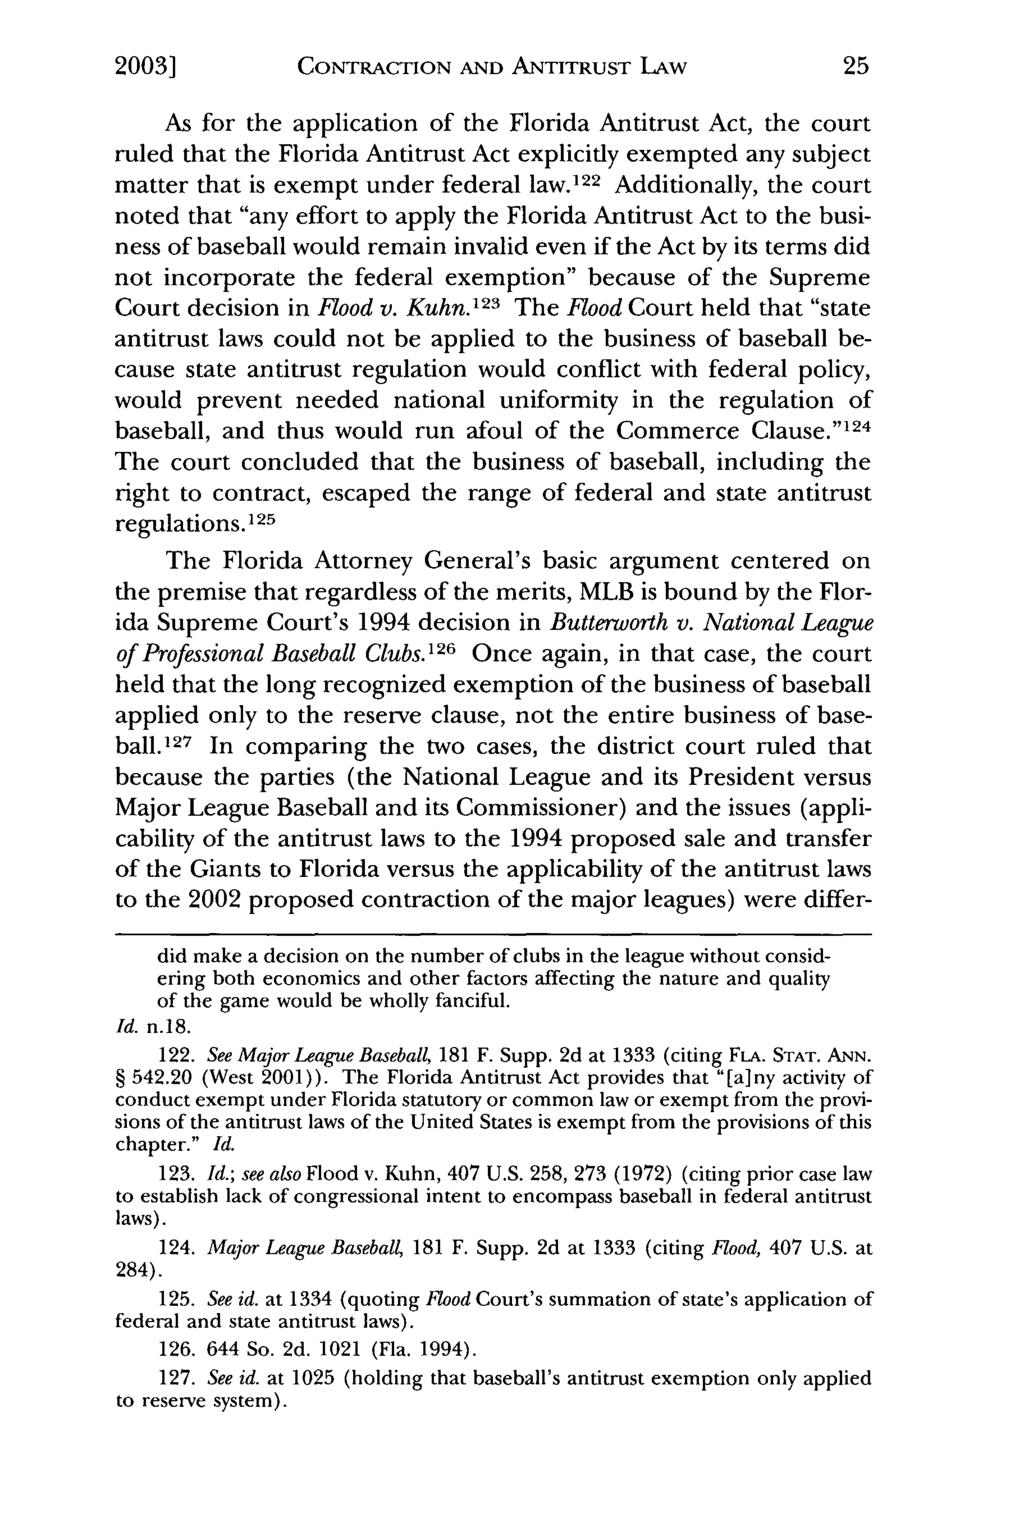 2003] Wolohan: Major League Baseball Contraction and Antitrust Law CONTRACTION AND ANTITRUST LAw As for the application of the Florida Antitrust Act, the court ruled that the Florida Antitrust Act